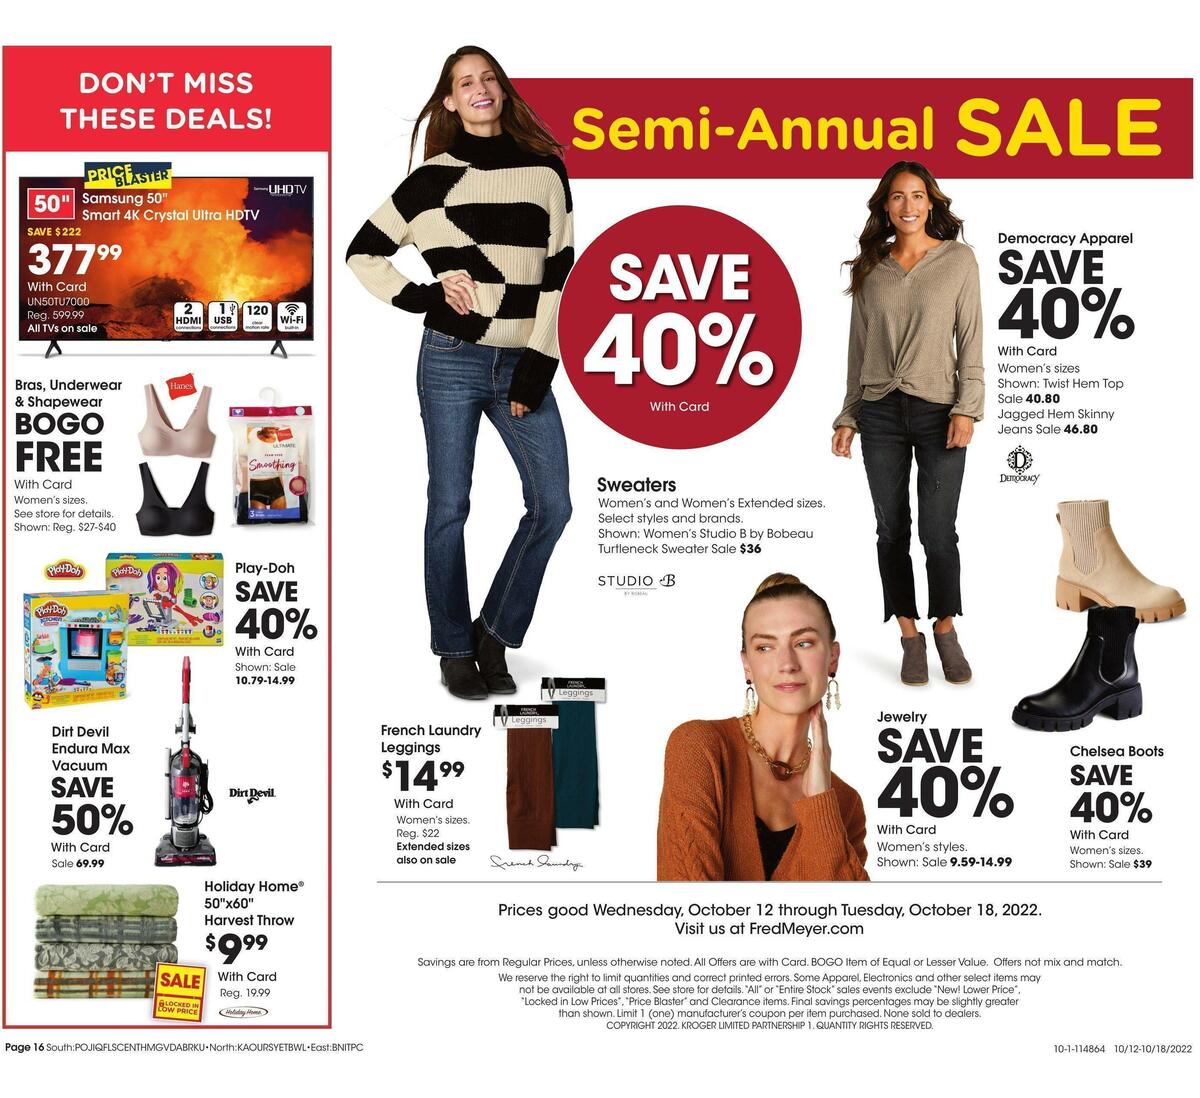 Fred Meyer General Merchandise Weekly Ad from October 12